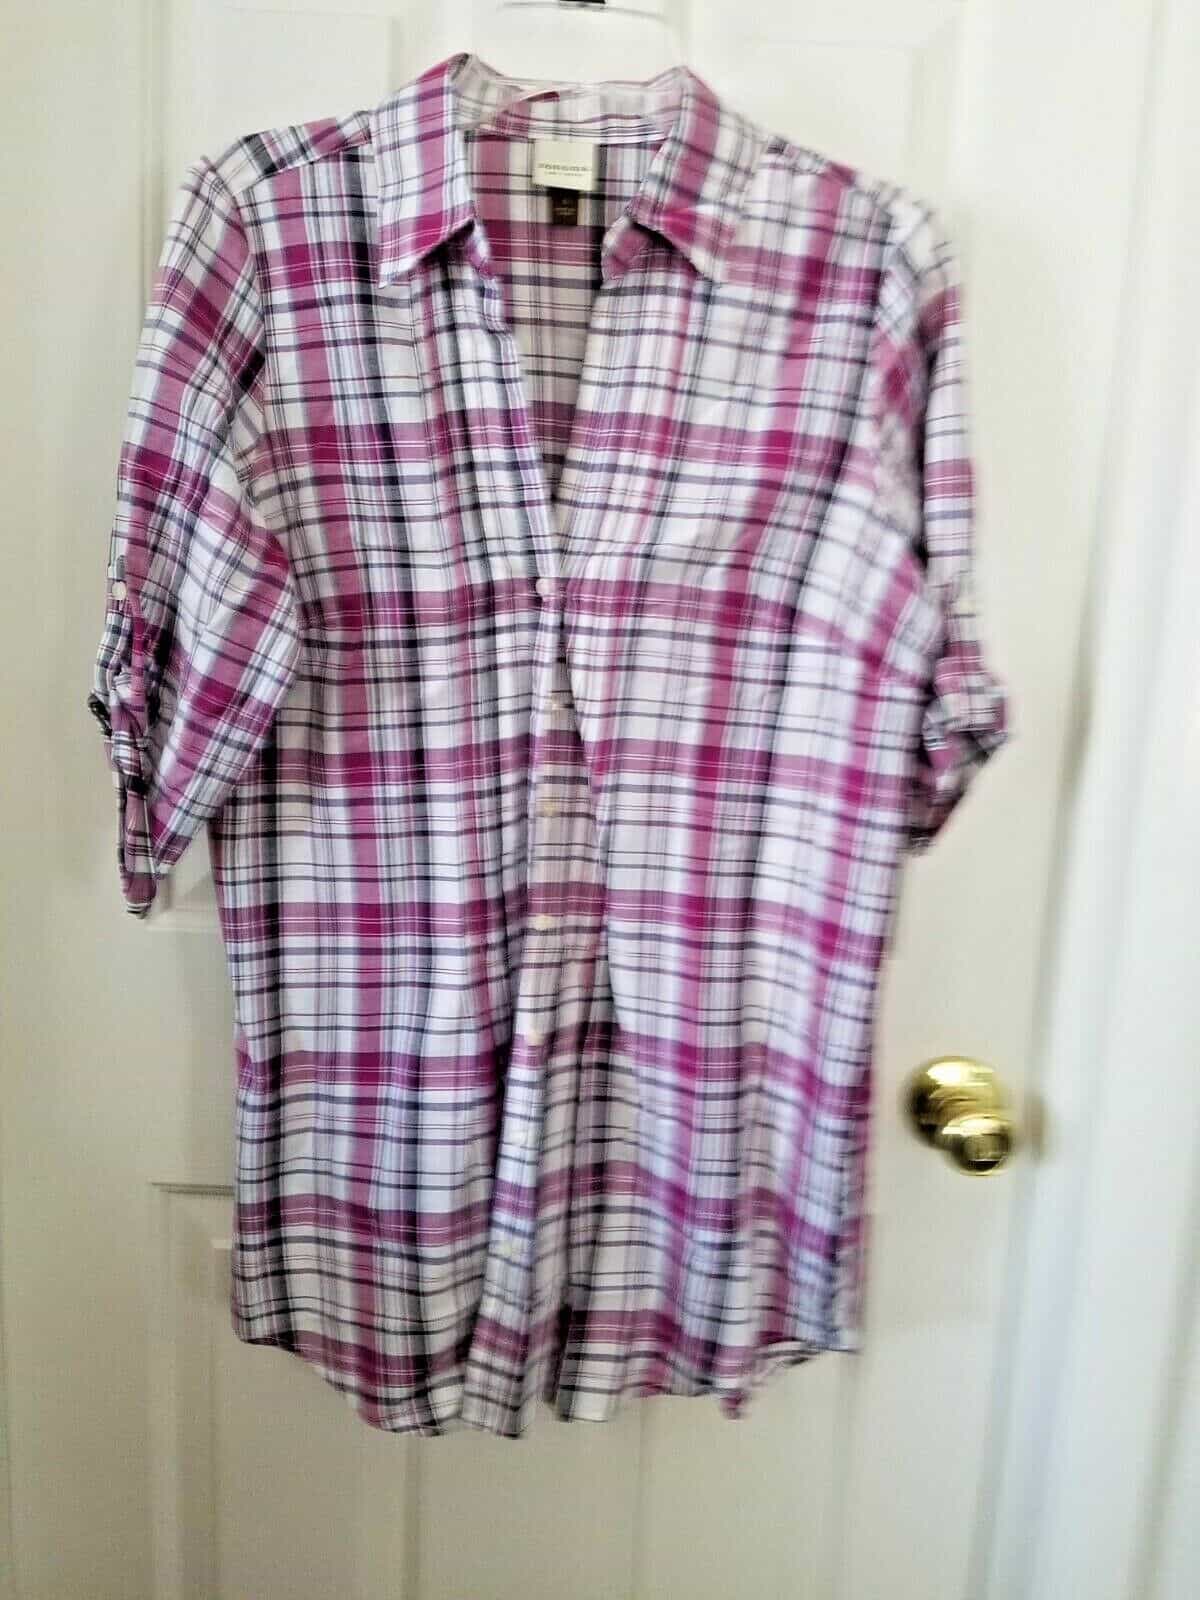 Women’s Sonoma Brand Plaid Top With Matching Tank Top Size Small